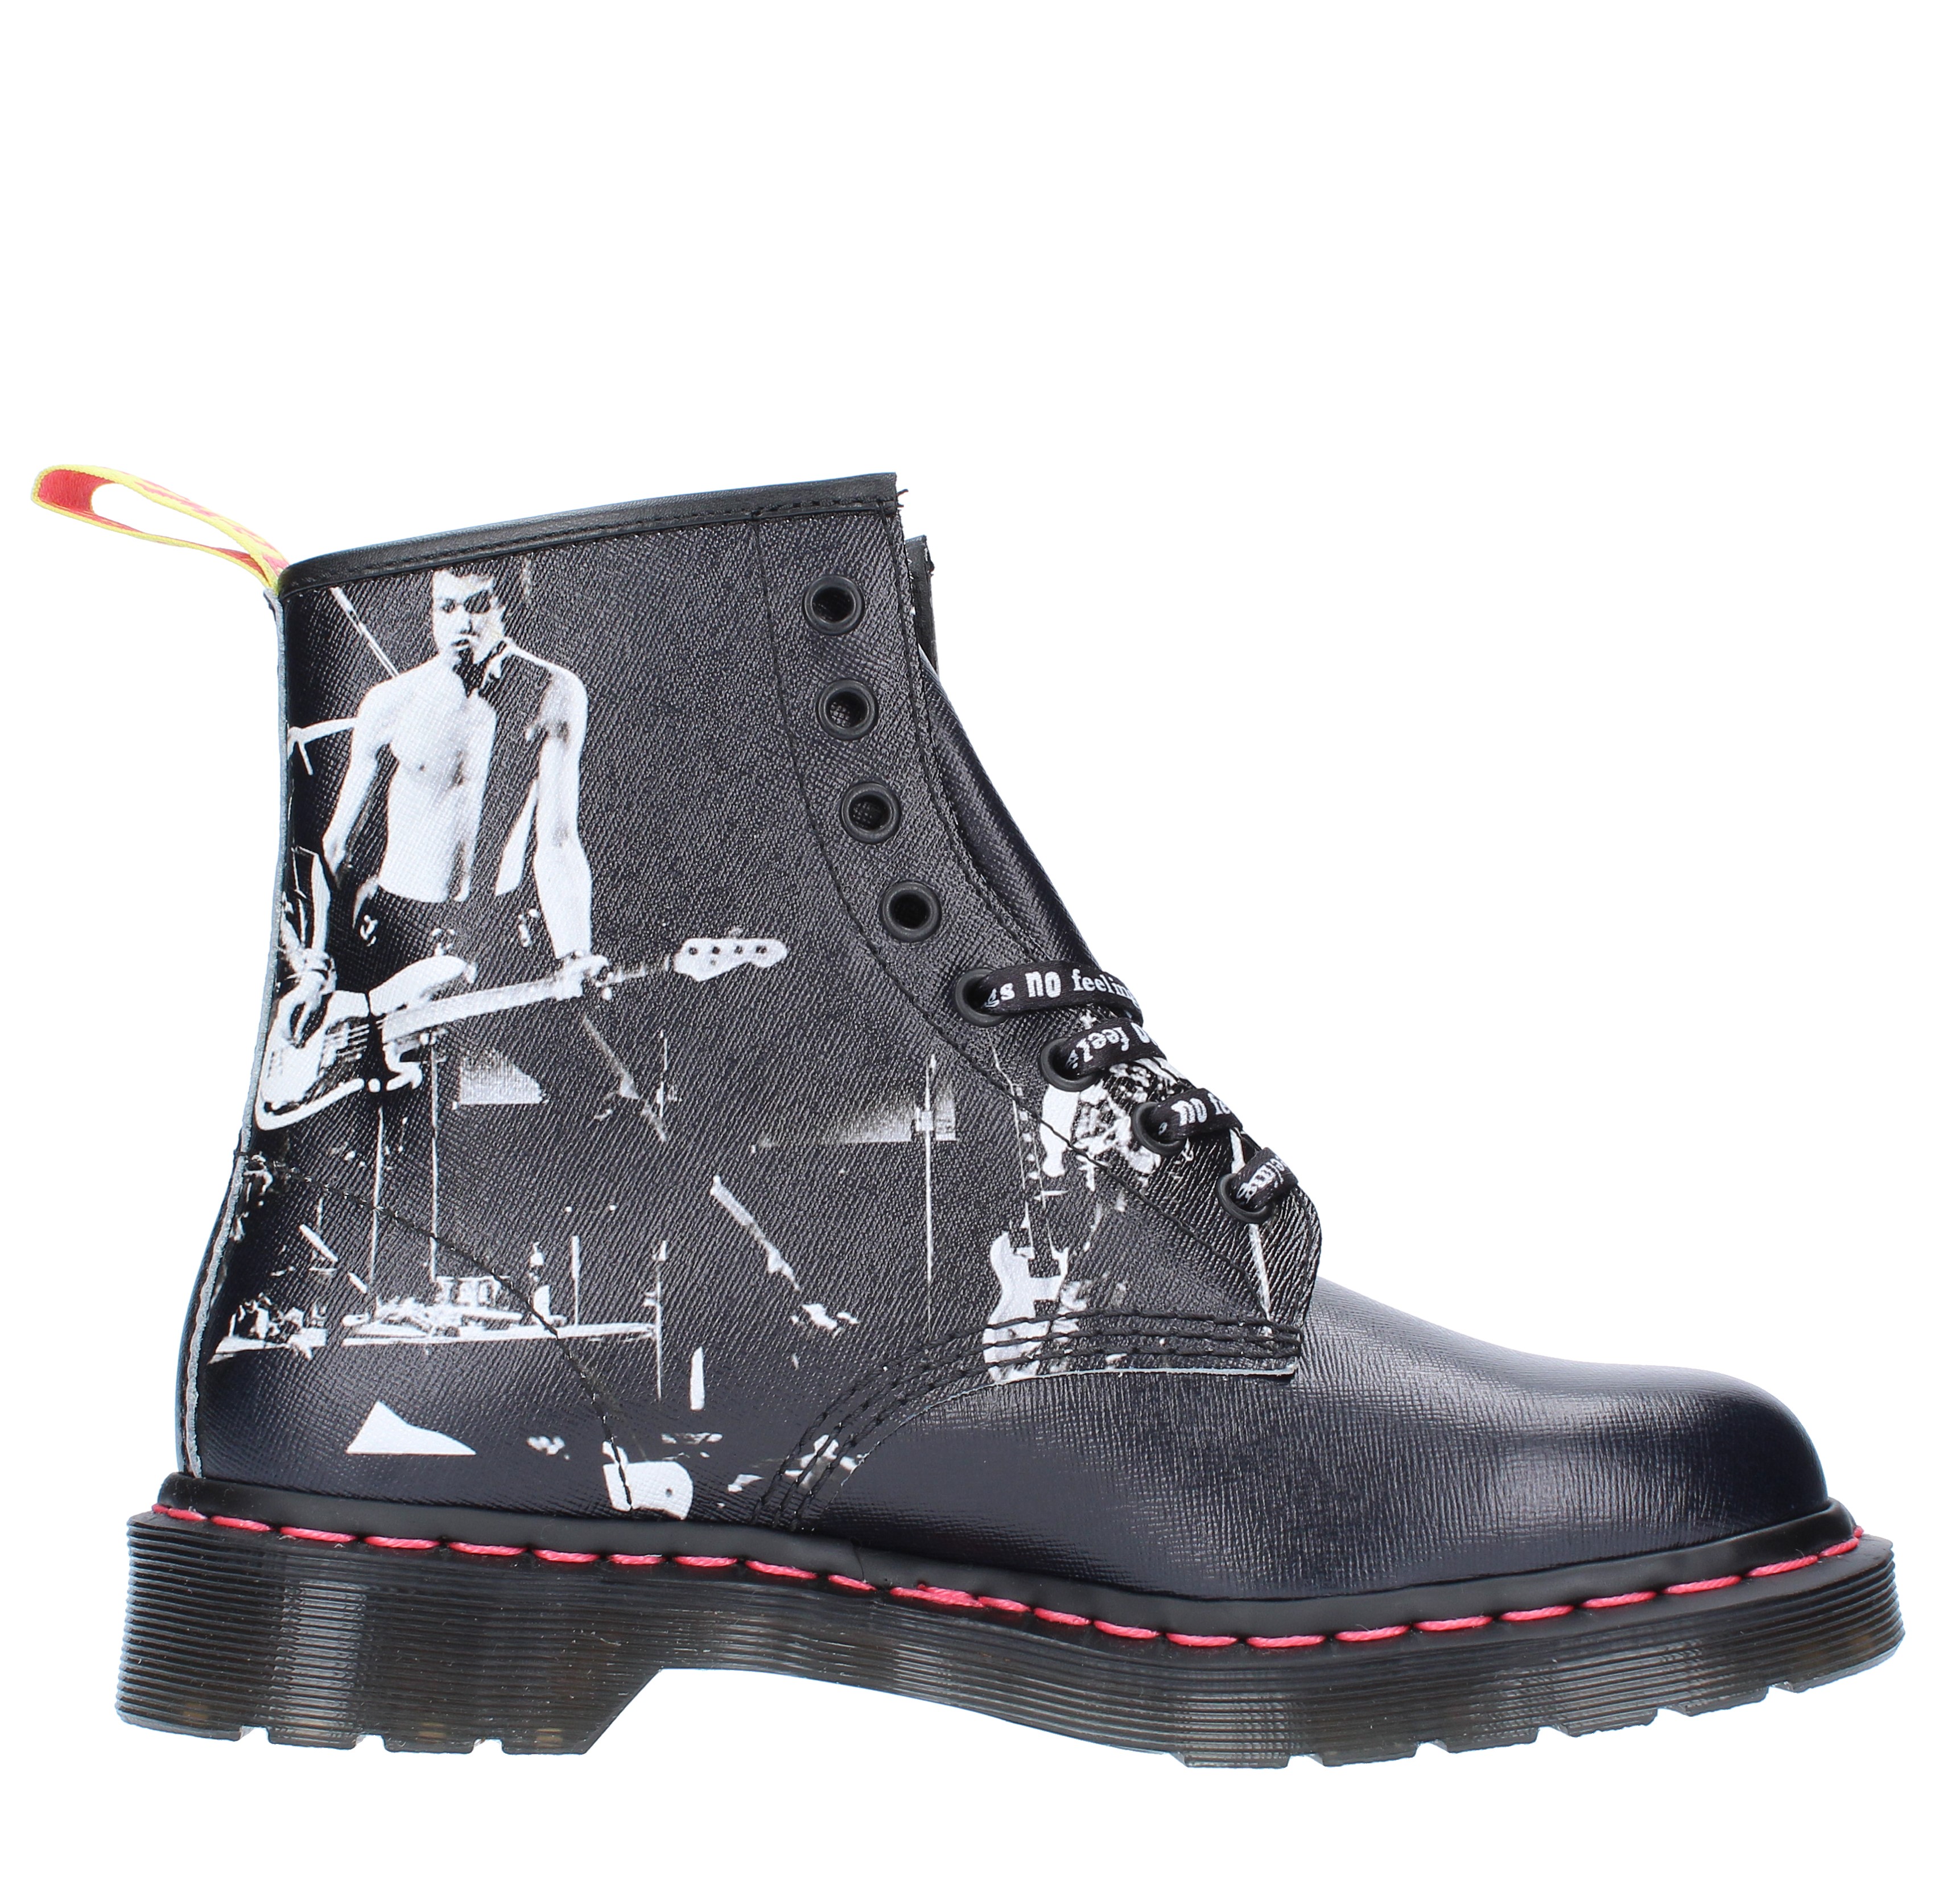 Leather ankle boots - DR. MARTENS - Ginevra calzature